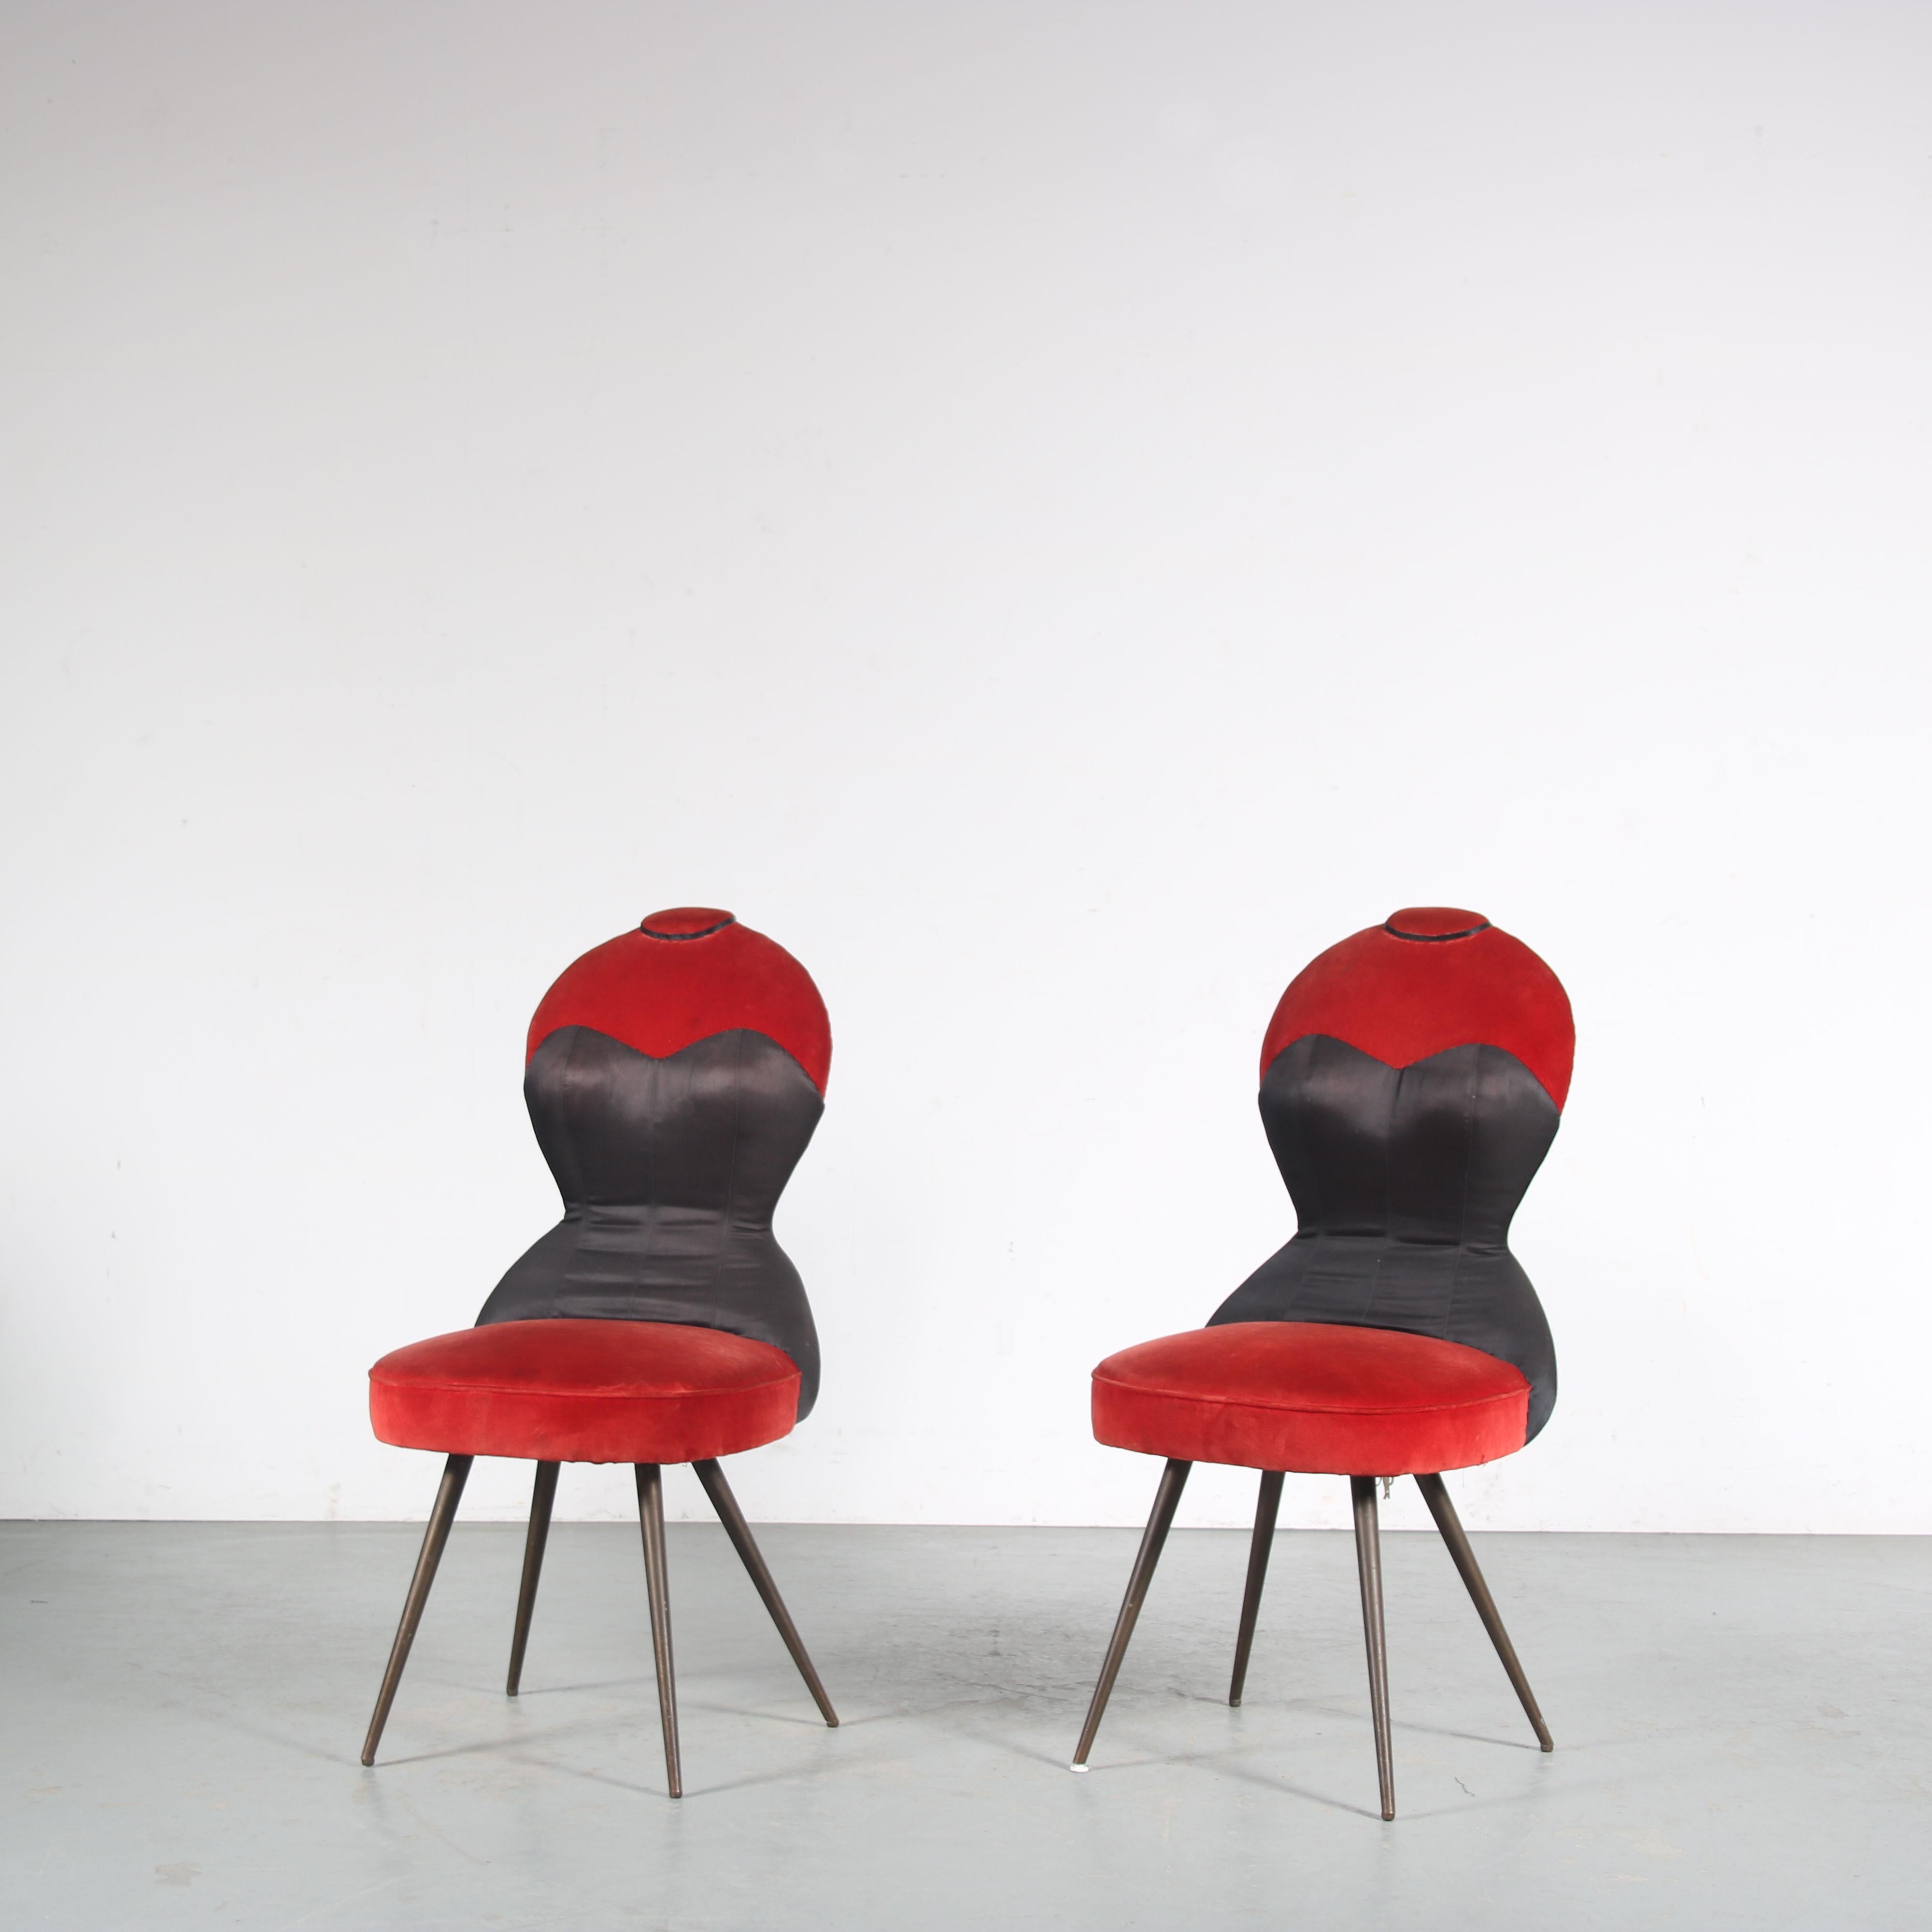 A unique set of two side chairs, manufactured in France around 1950.

These eye-catching, quality chairs have a very unique style and are impressively well made. Upholstered in high quality red velvet with black skai and brass, tapered legs. The